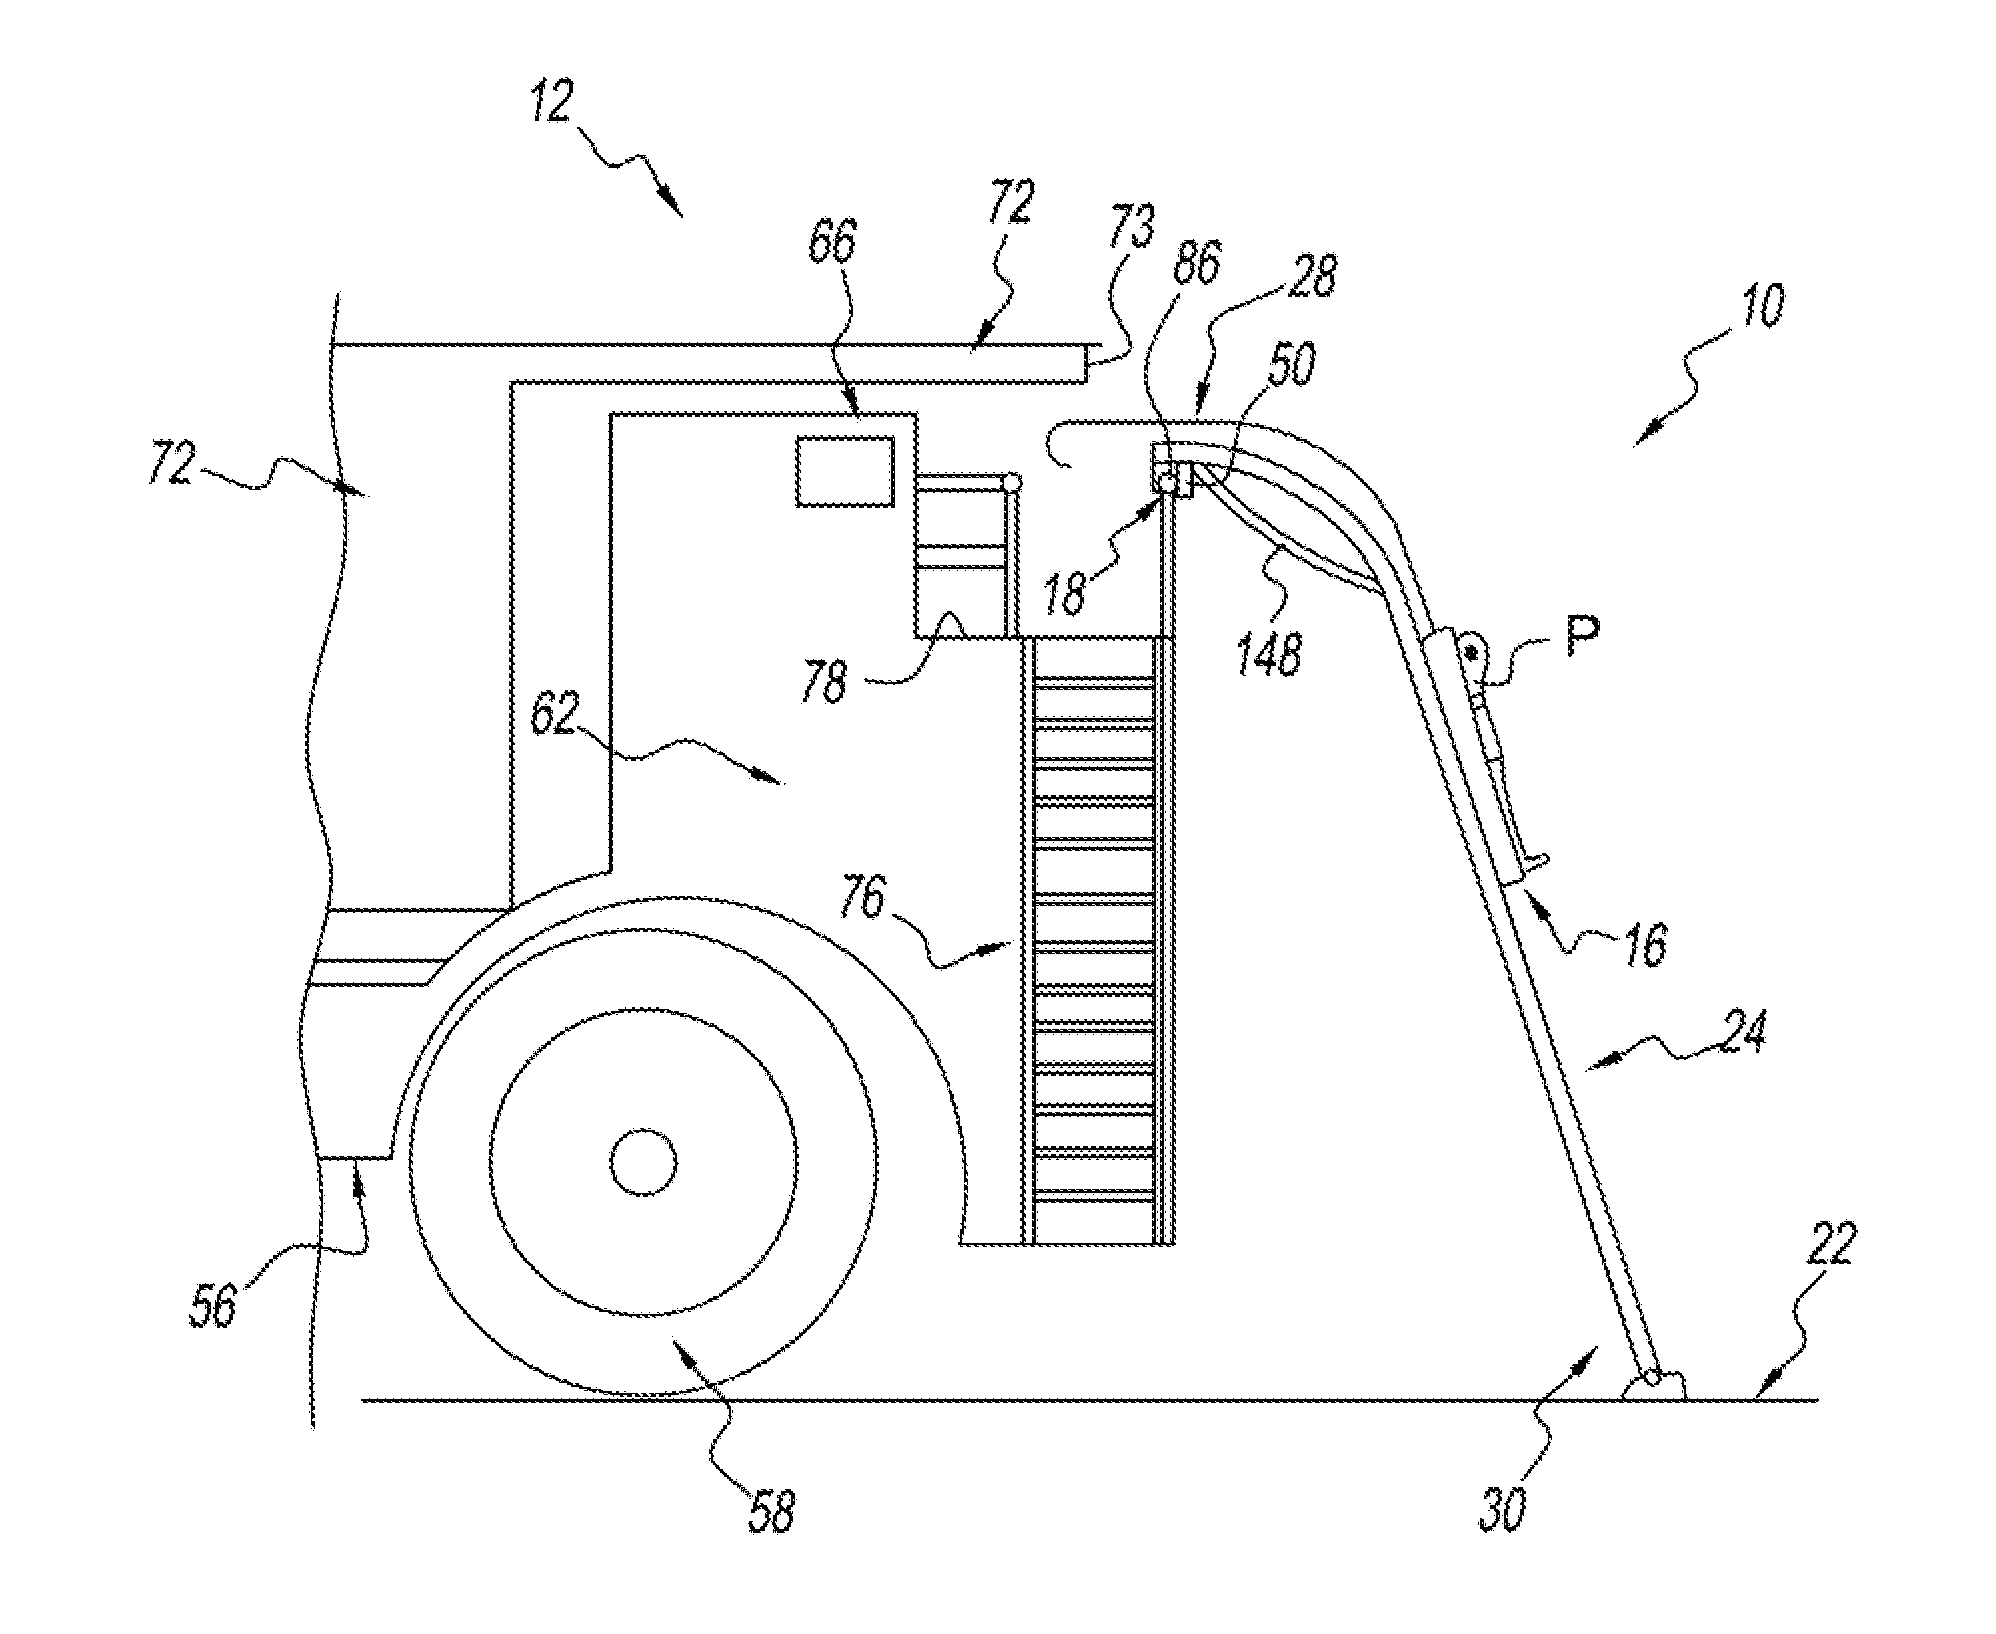 Portable extrication device and method of use